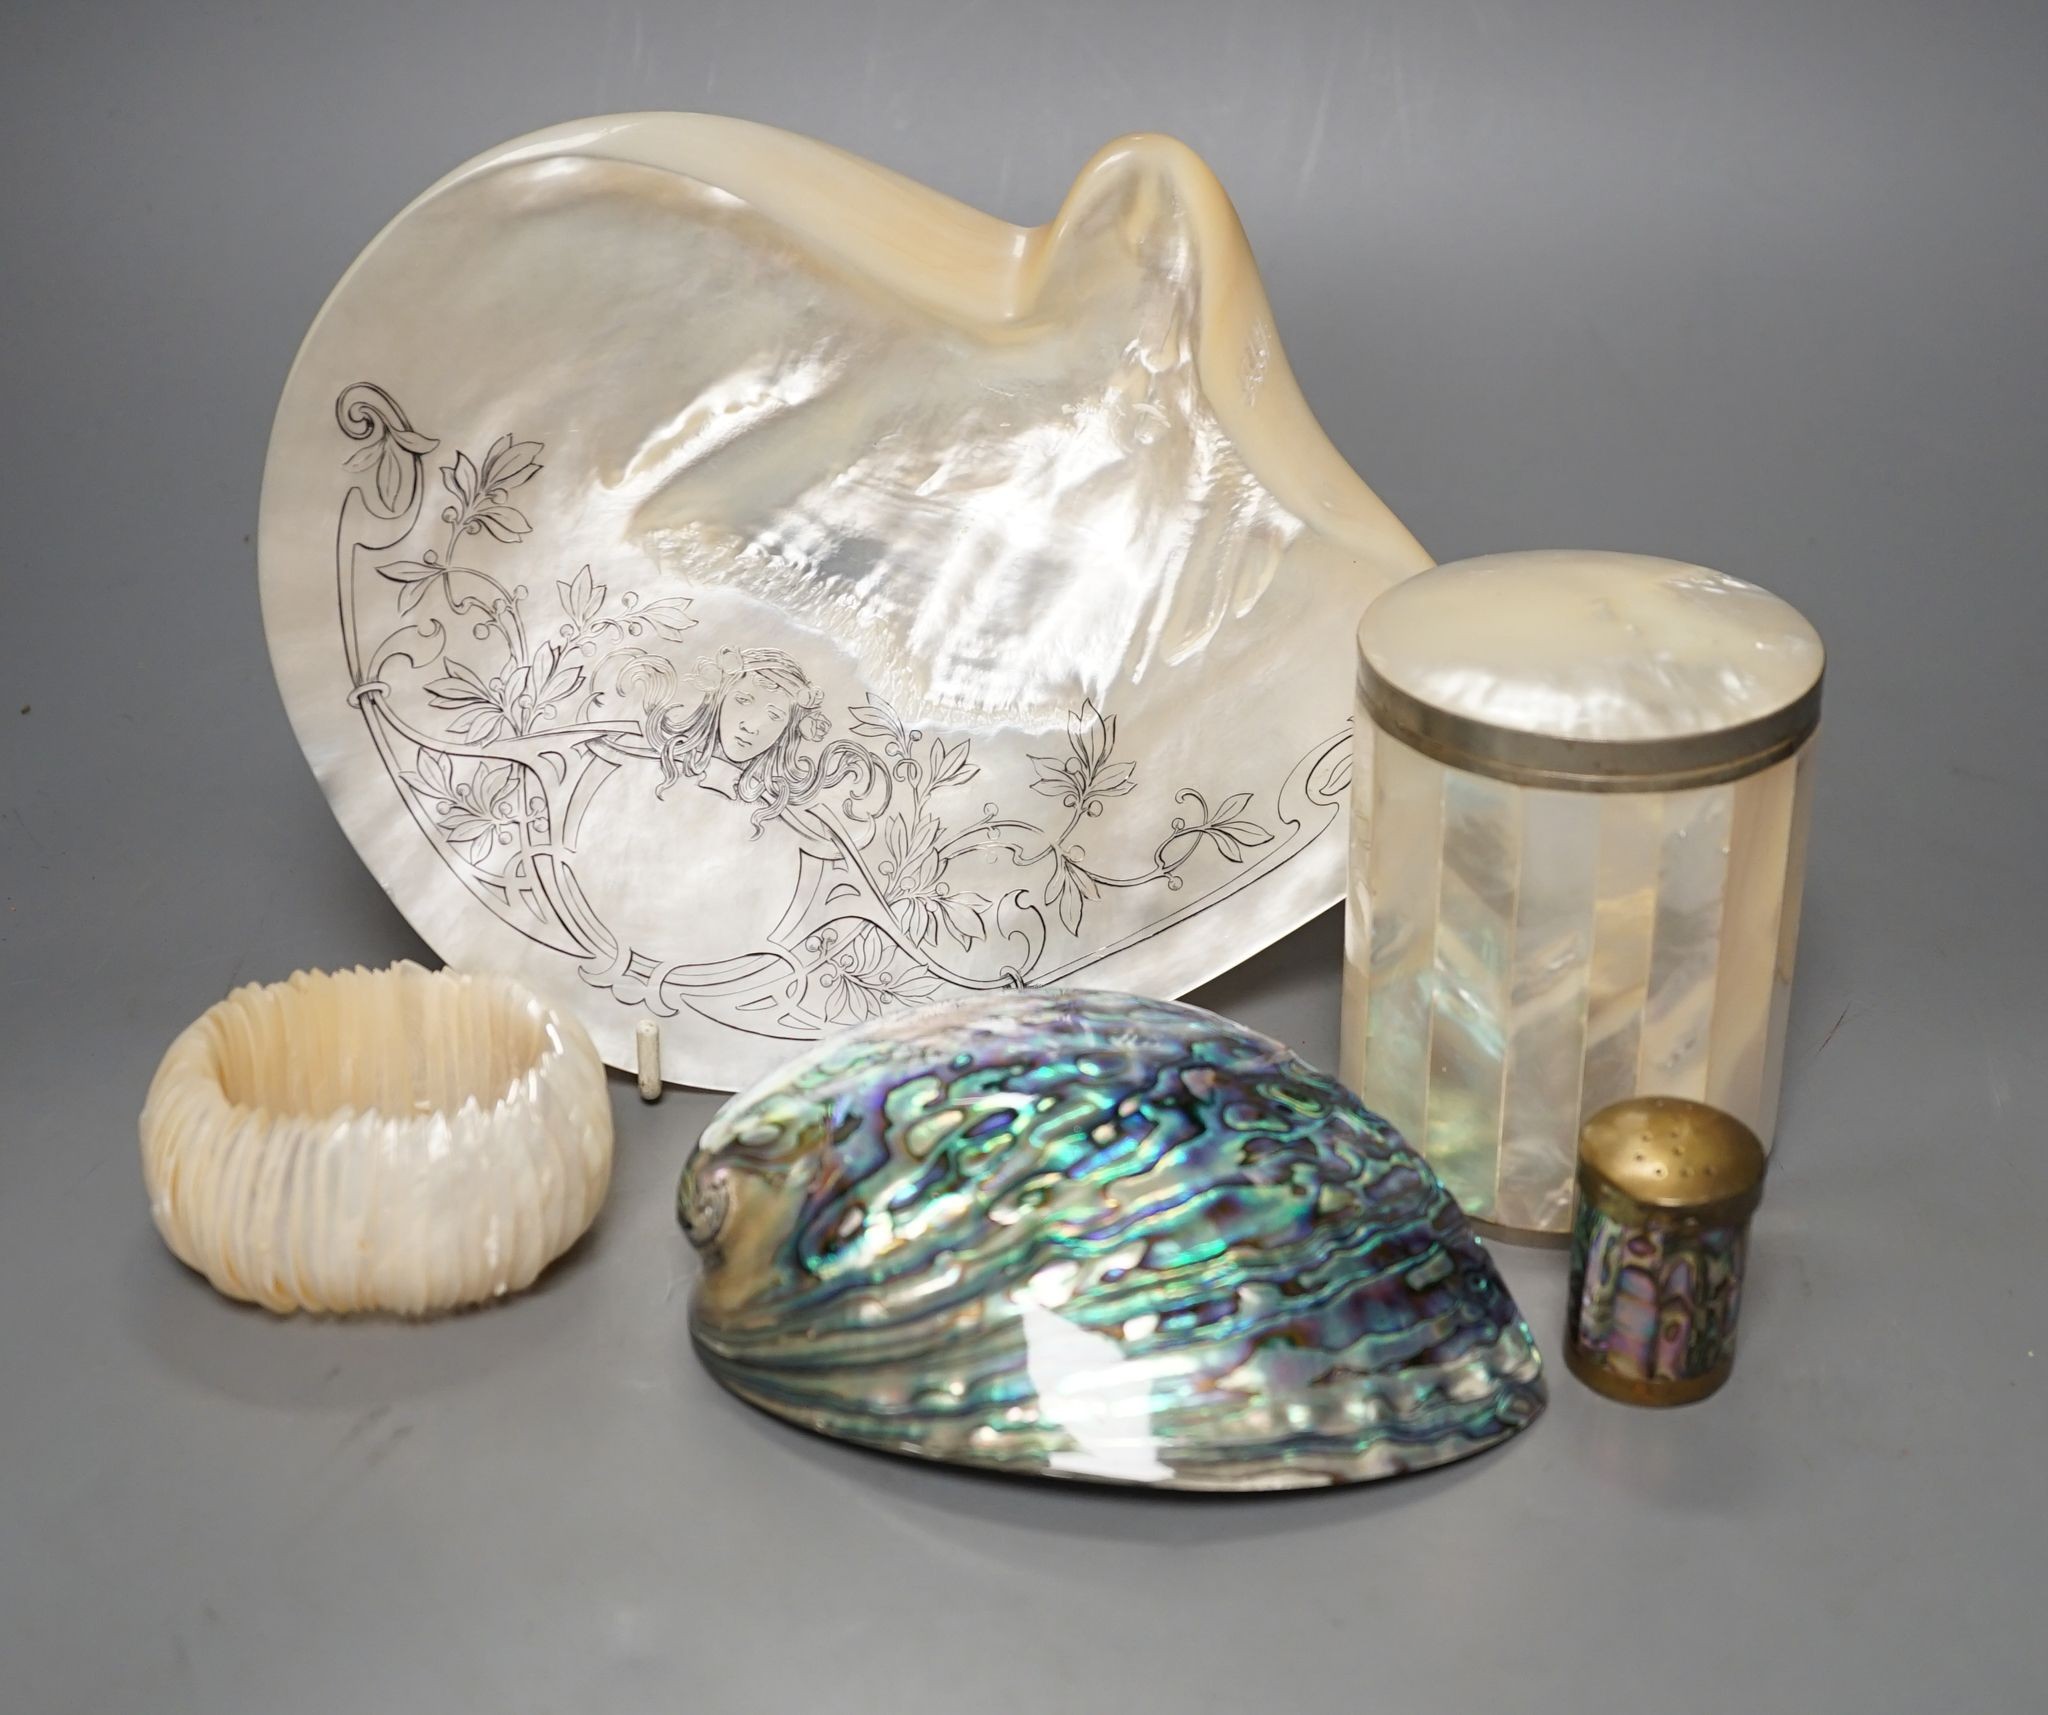 An engraved pearl shell, 22cm, a cylindrical box and bracelet, and two abalone shells